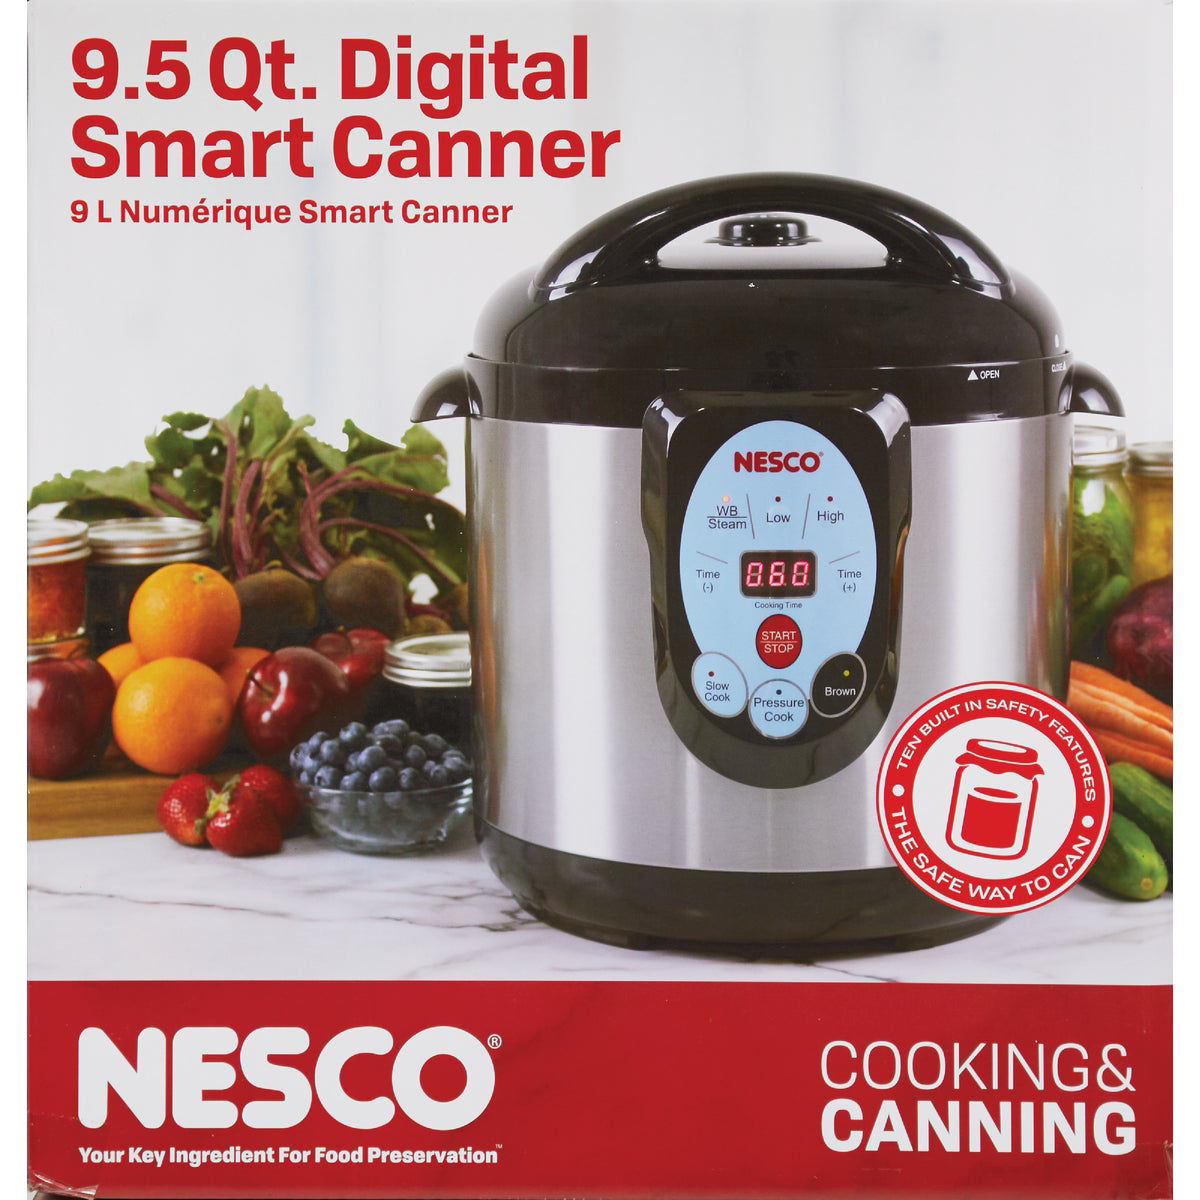 Pressure Canning with the Nesco Digital Smart Canner